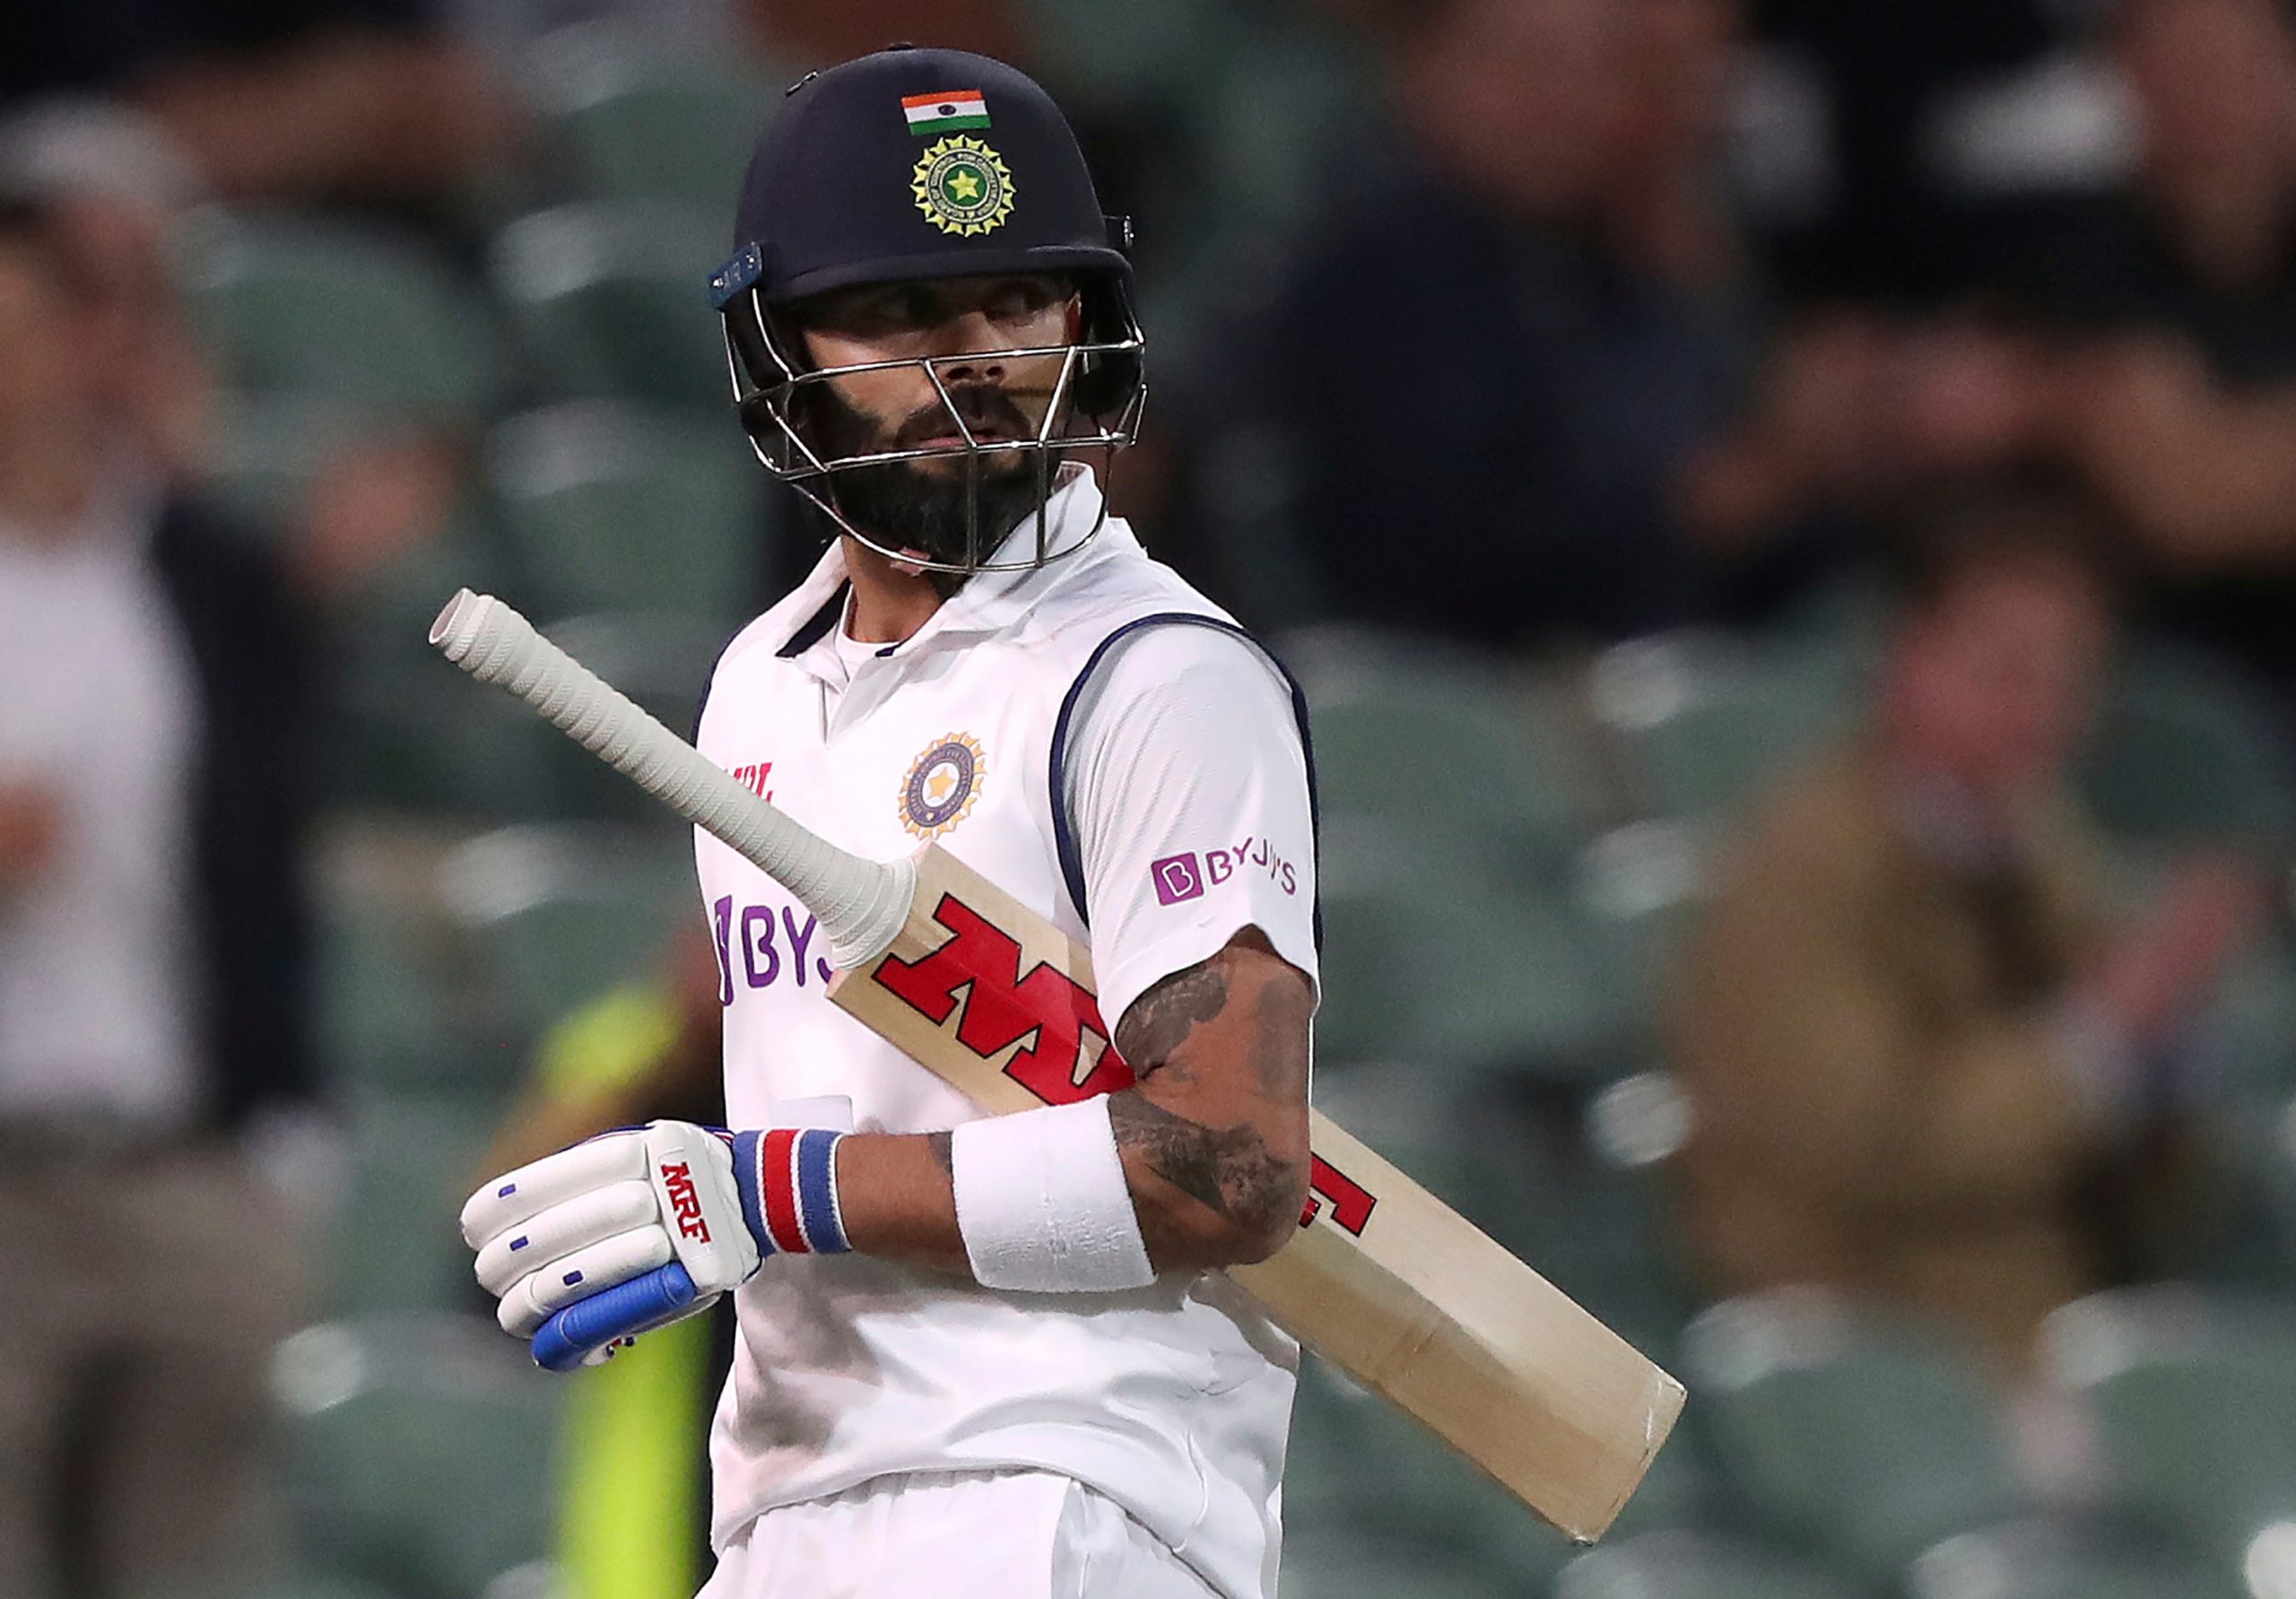 ‘Absolutely unacceptable’: Virat Kohli condemns racial abuse at SCG